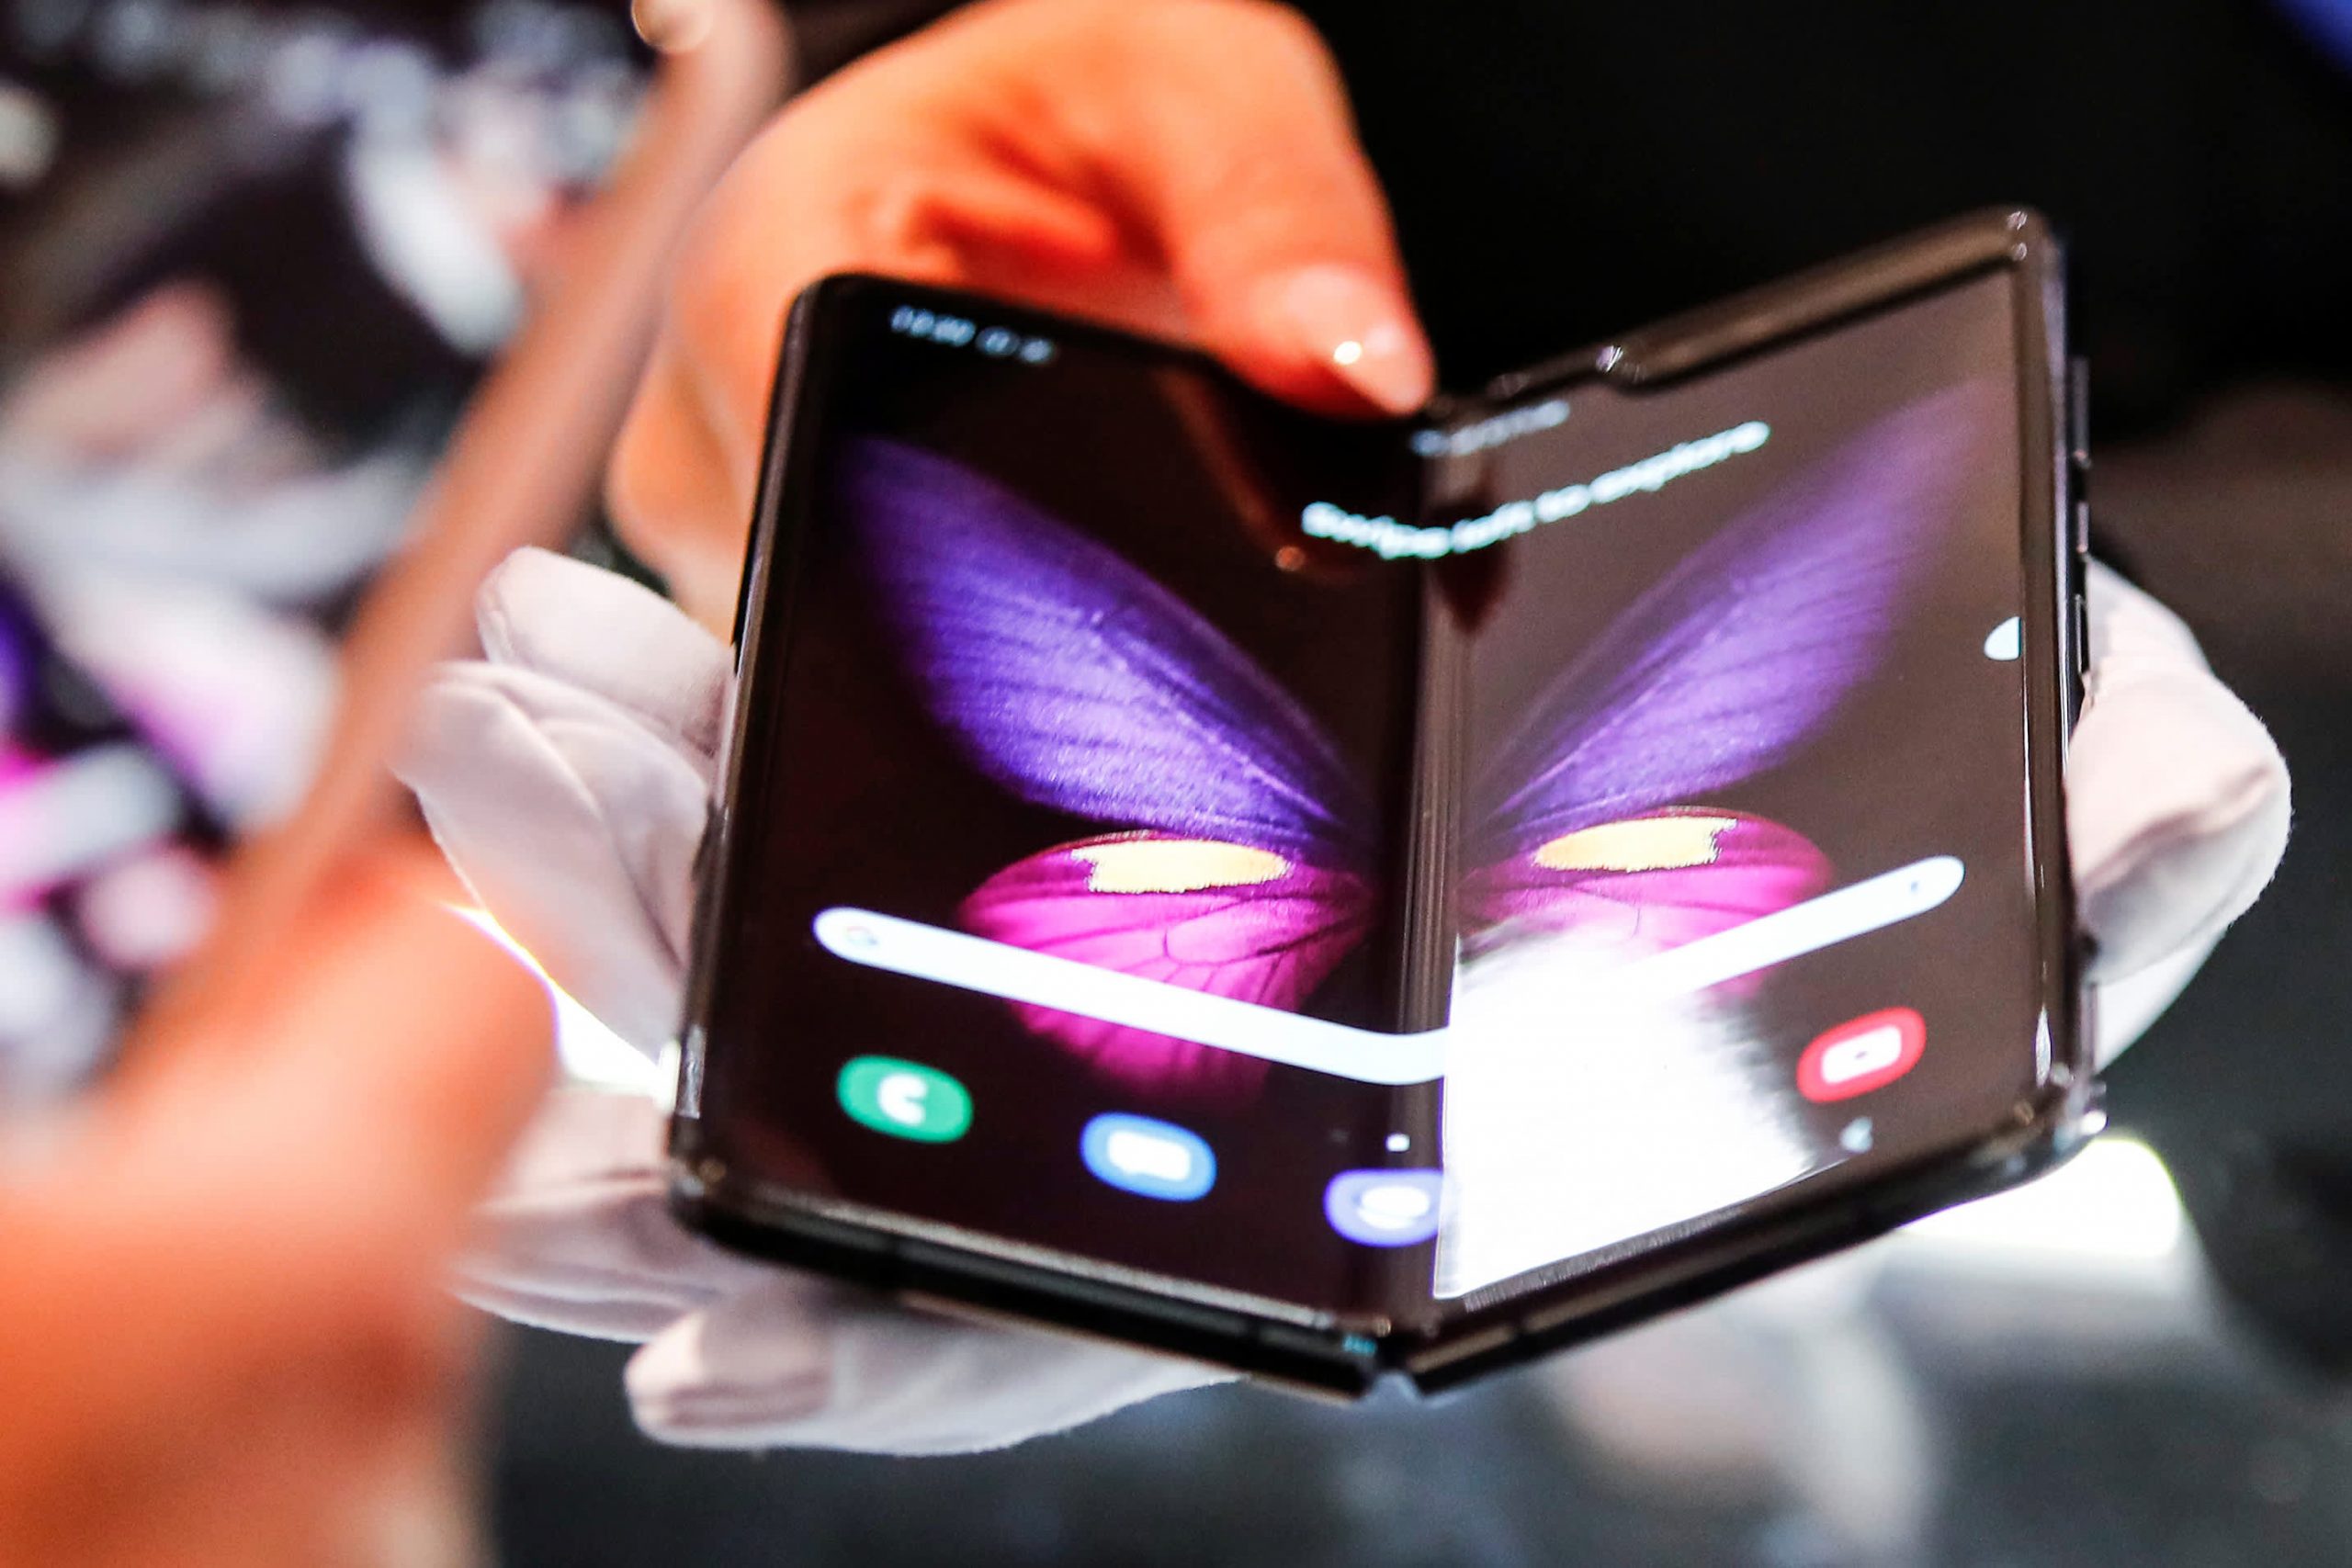 Apple folding phone could come soon after Samsung Galaxy Z Fold